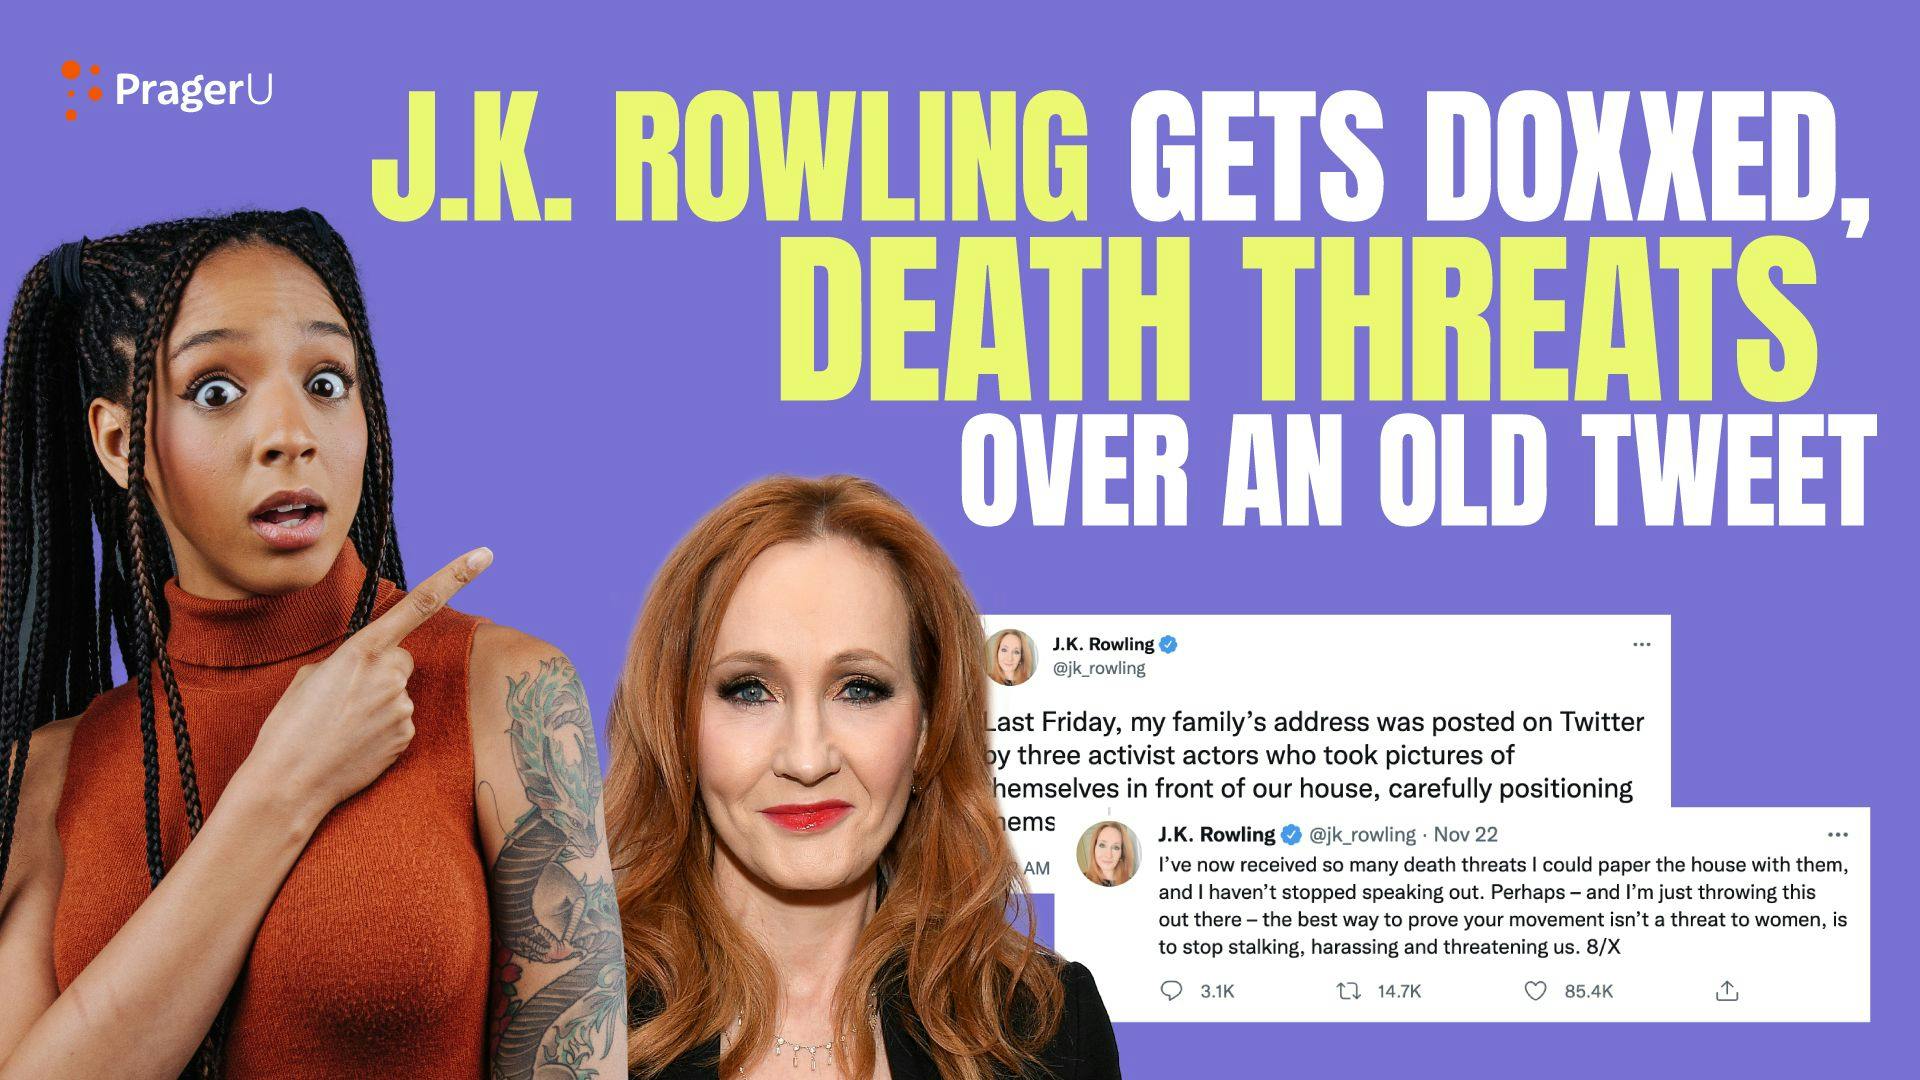 Harry Potter Creator Gets Cancelled Over Old Tweet